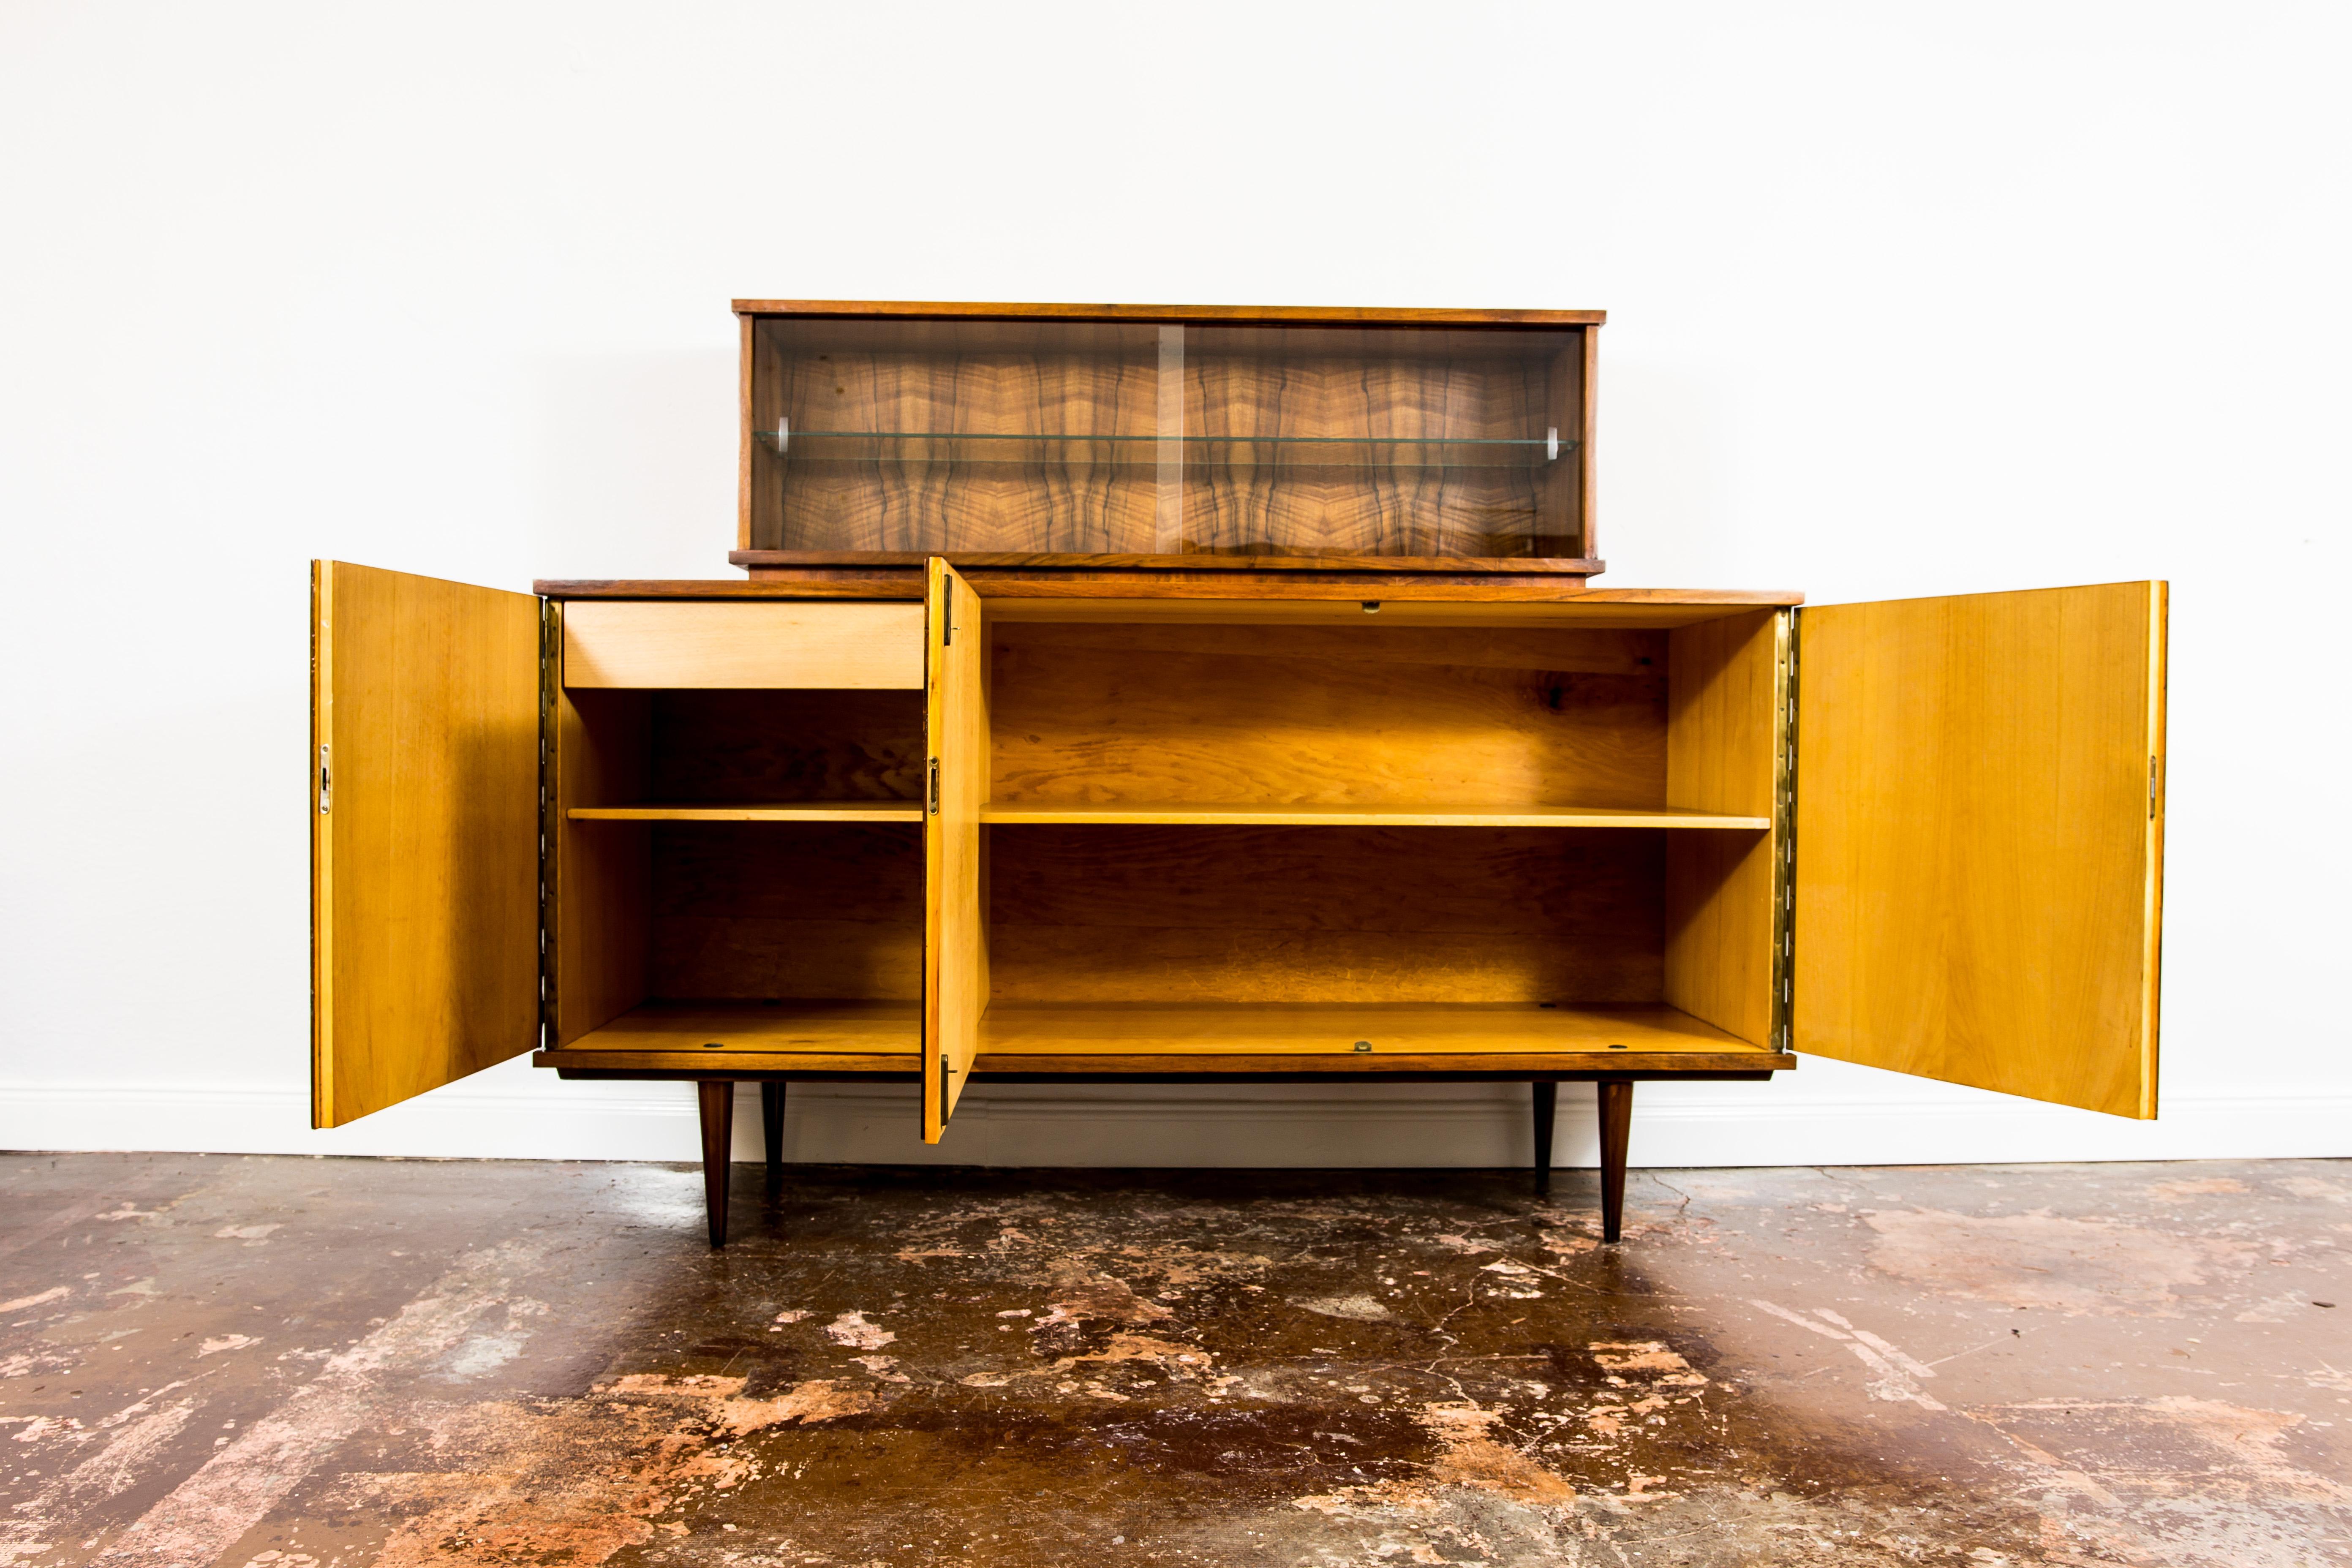 Vintage walnut veneer sideboard from Lódzkie Furniture Factories, made in Poland in 1960's 
Credenza has three doors, shelves and one drawer. This piece offers a display cabinet on the top comes with two clear glass sliding doors, and glass